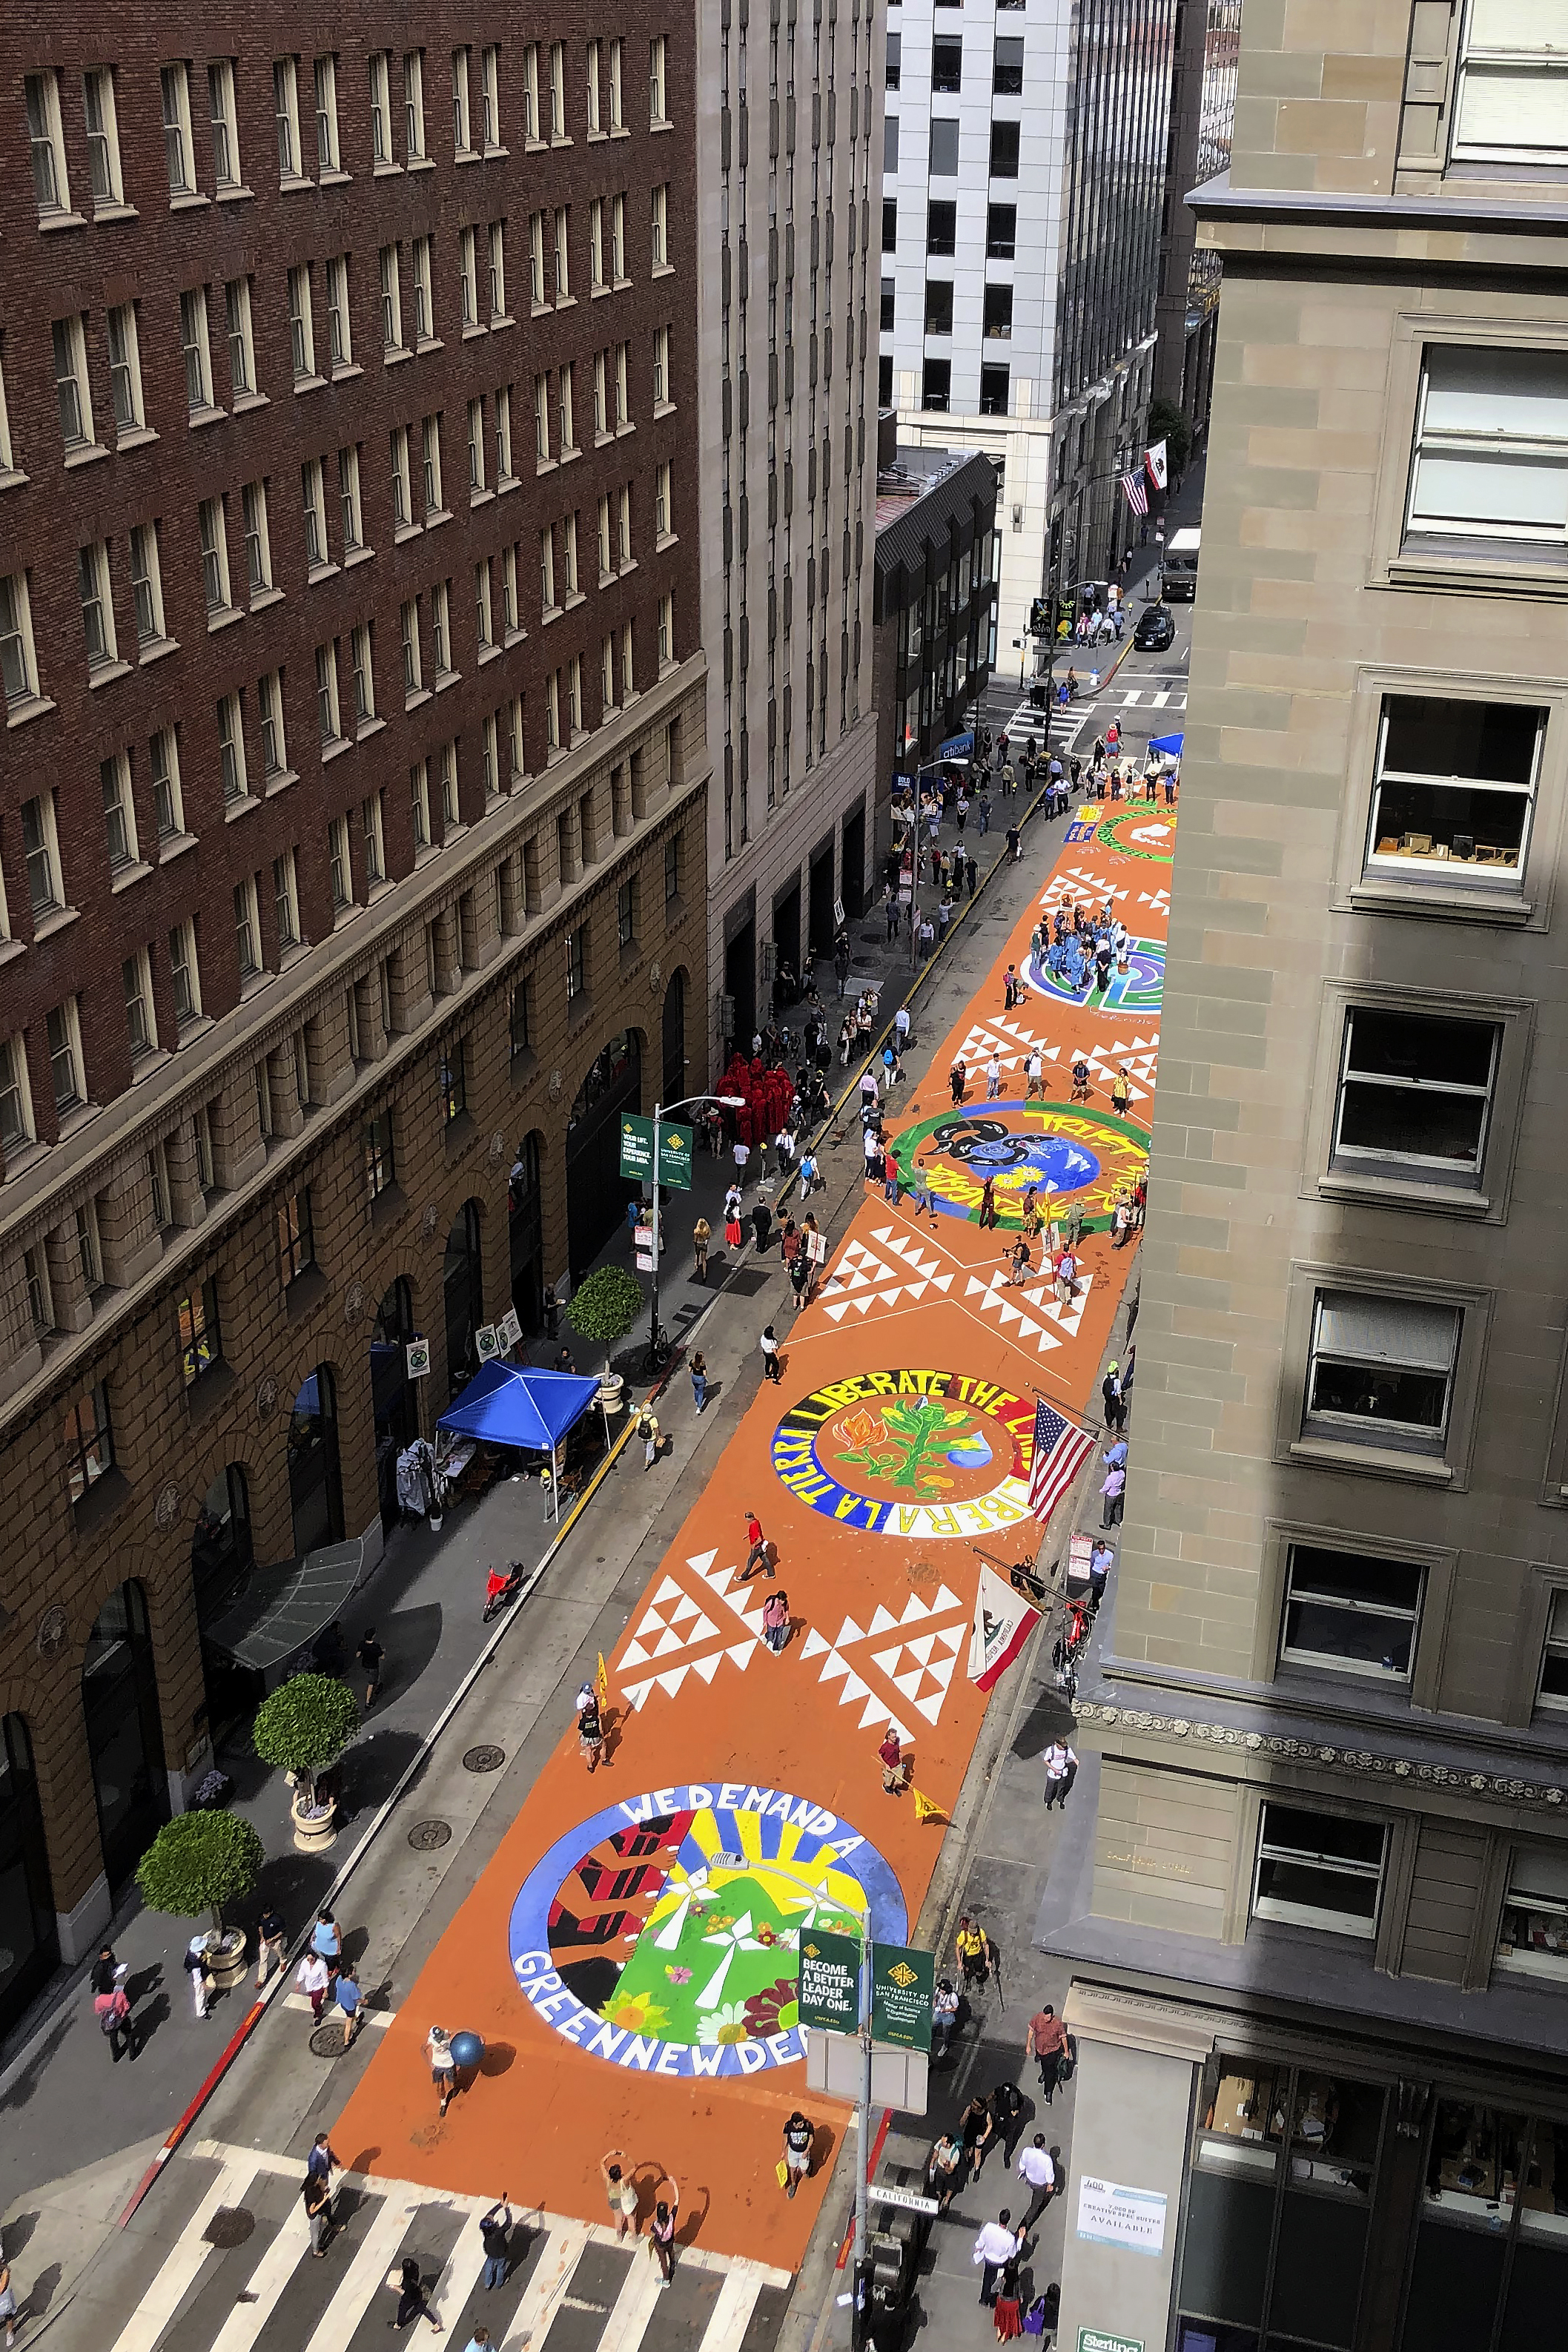 Block-long mural on pavement as seen from an office building on street.